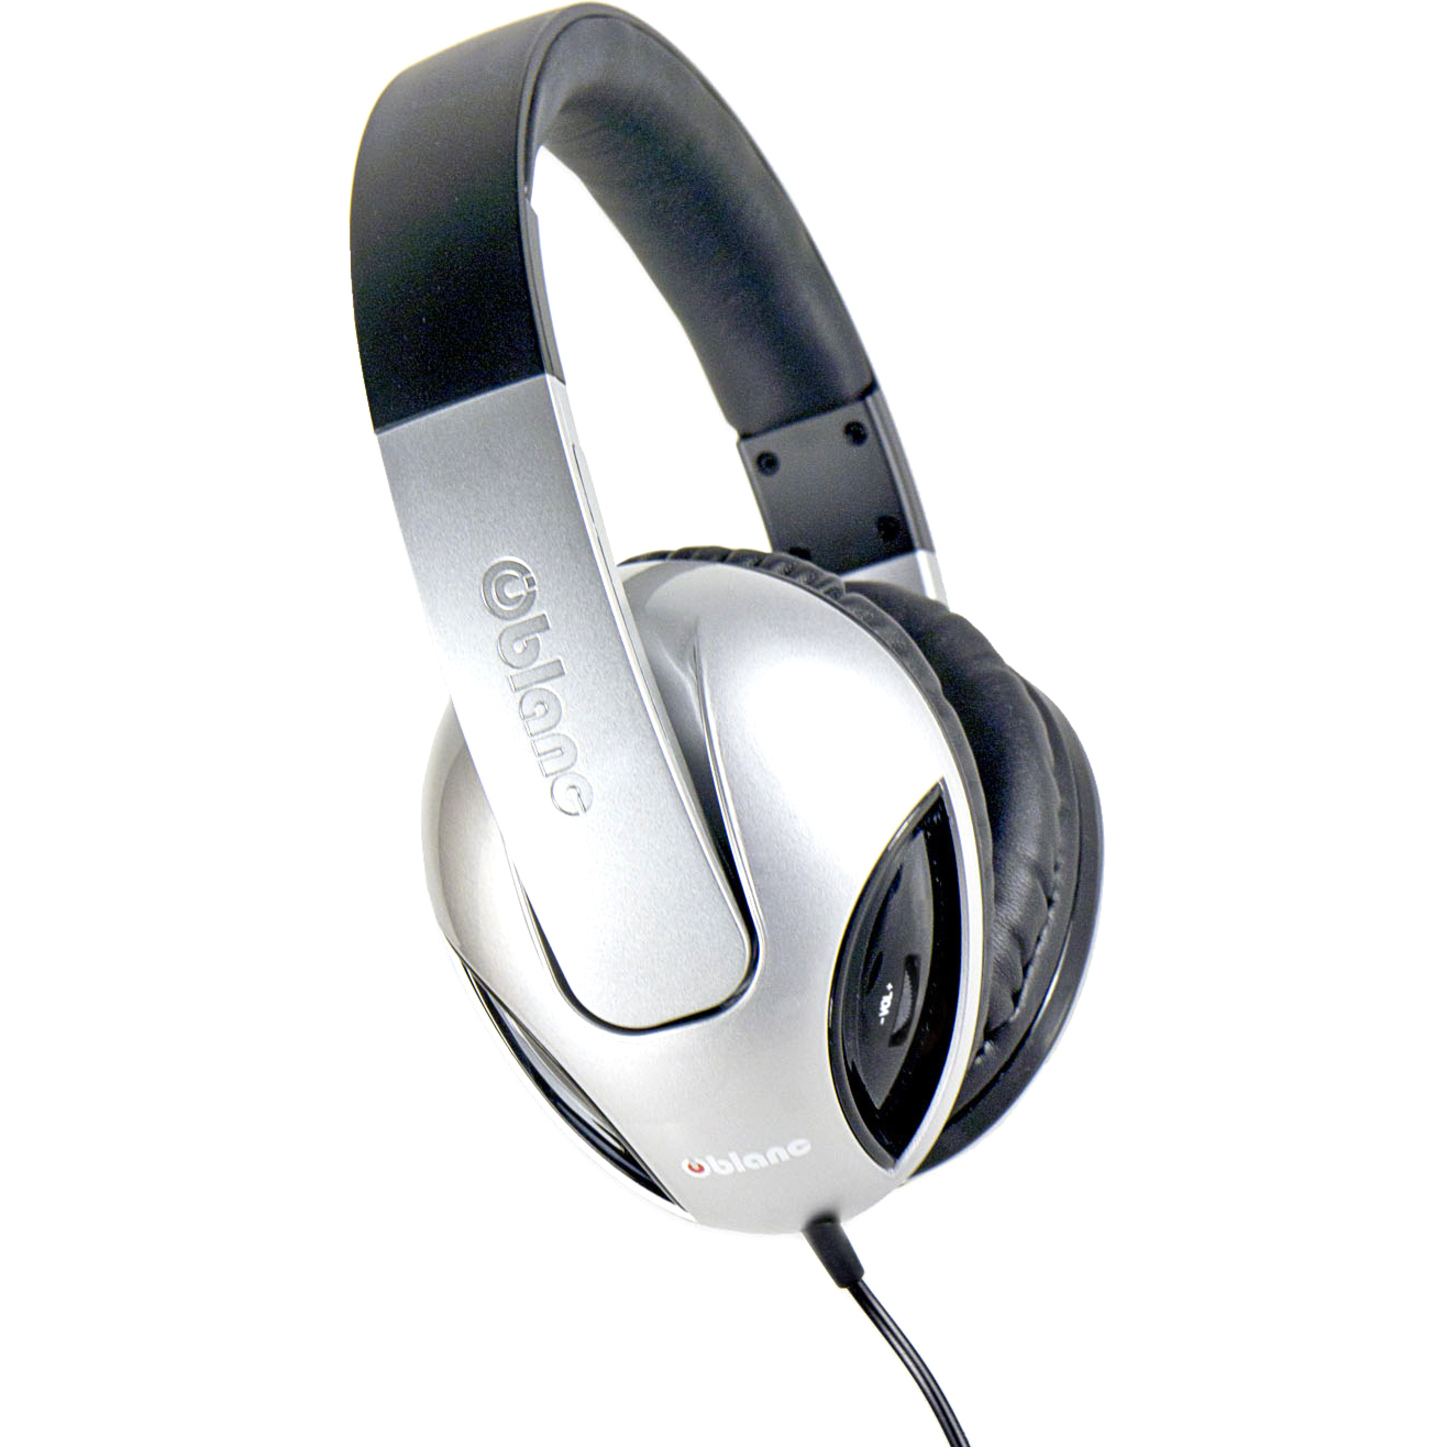 SYBA Multimedia Oblanc Cobra Silver Subwoofer Headphone W/In-line Microphone - image 1 of 2